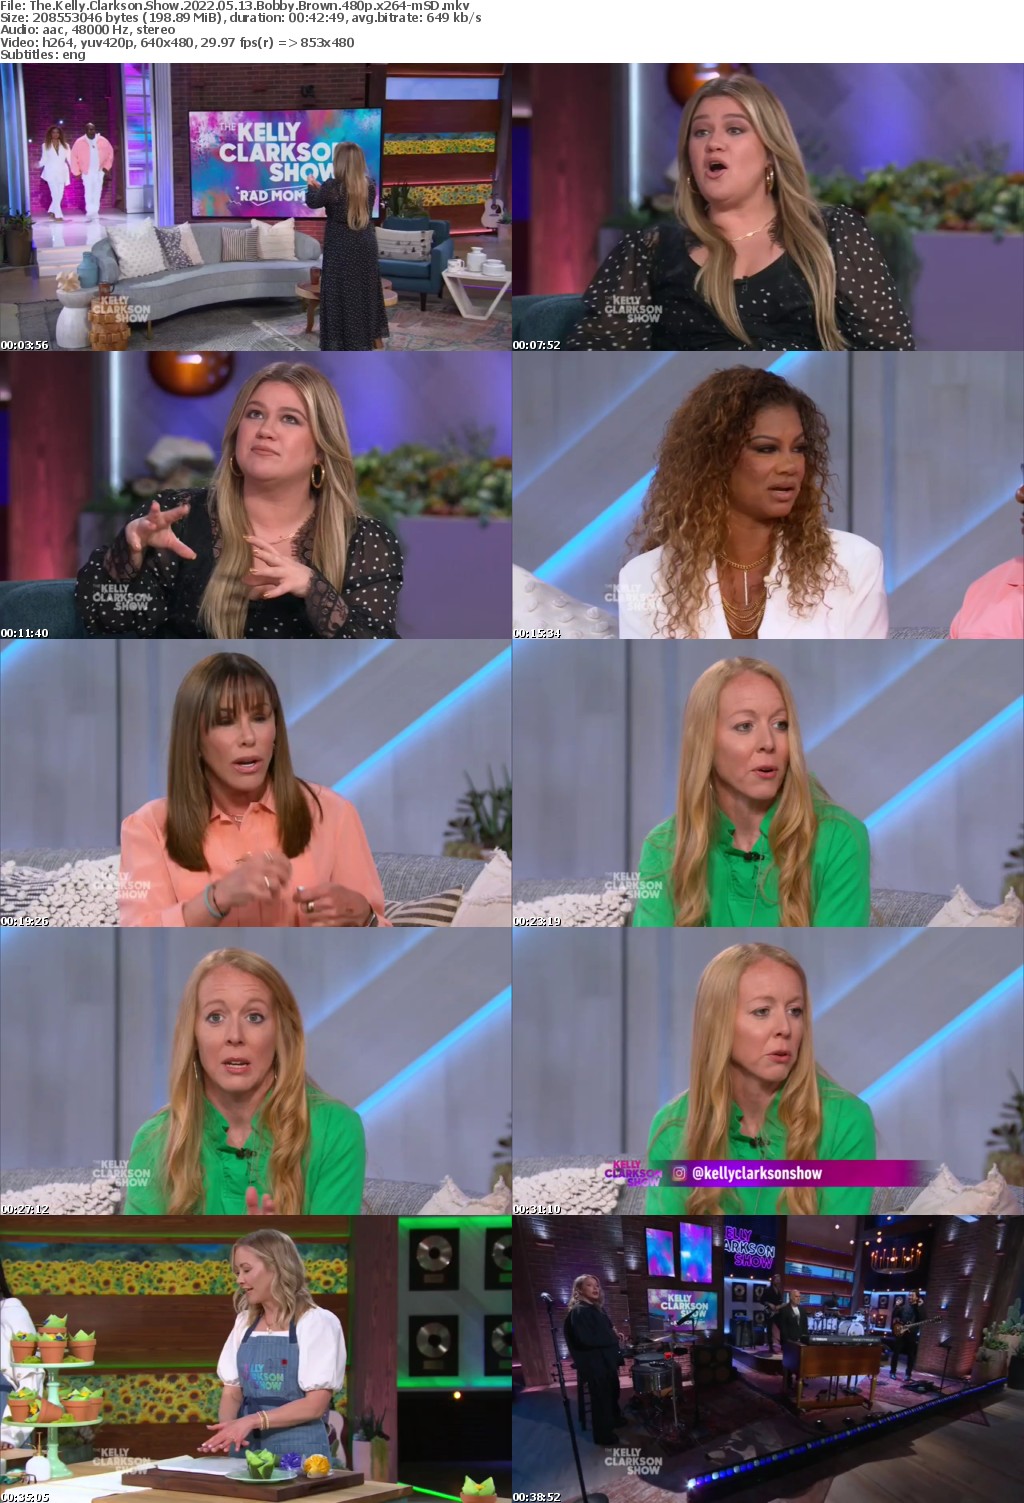 The Kelly Clarkson Show 2022 05 13 Bobby Brown 480p x264-mSD